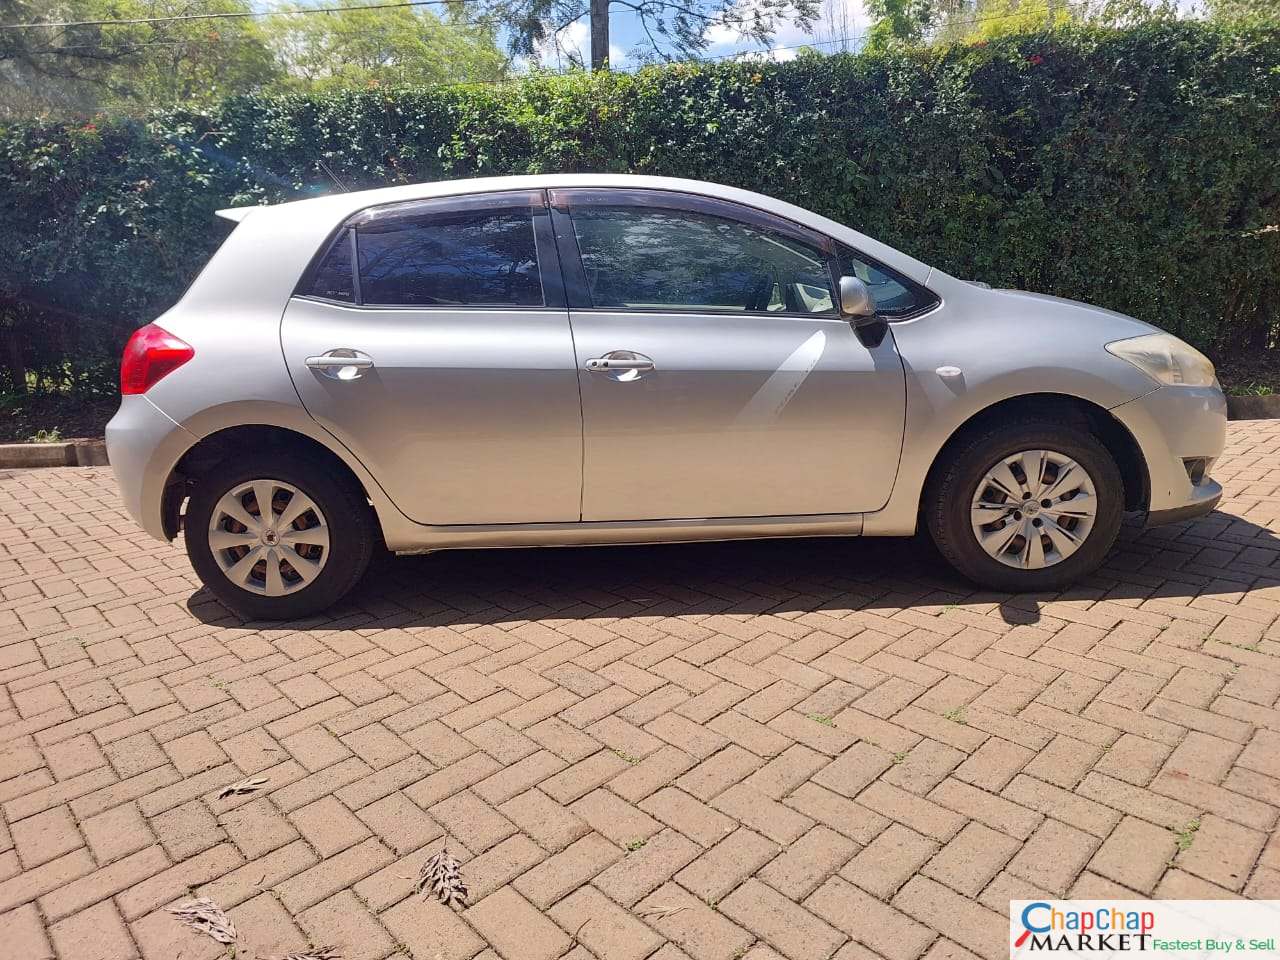 Toyota AURIS QUICK SALE You Pay 30% Deposit Trade in OK as NEW